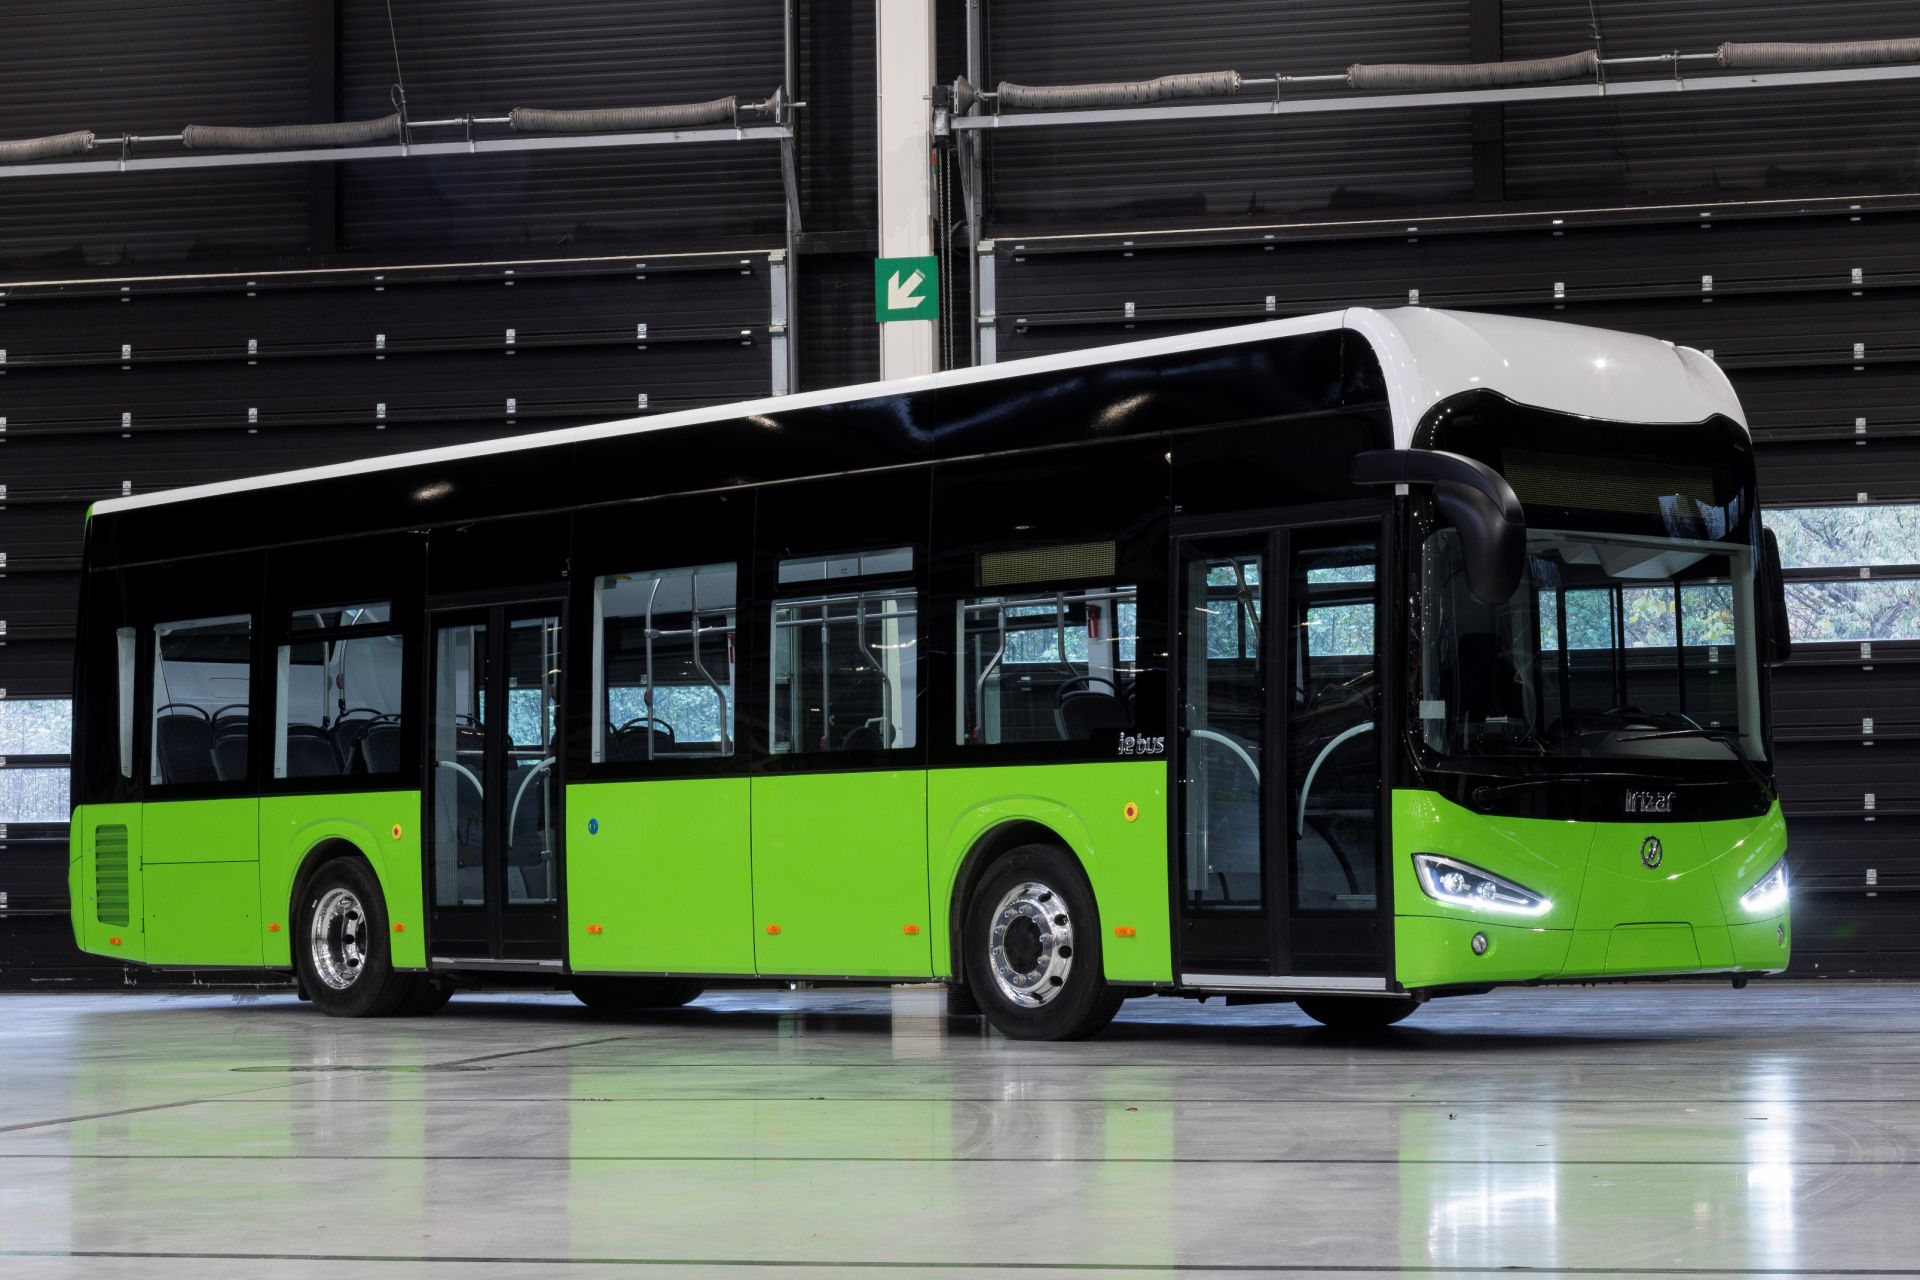 The Irizar Group continues expanding in Portugal and will supply 43 buses and coaches to the city of Guimarães